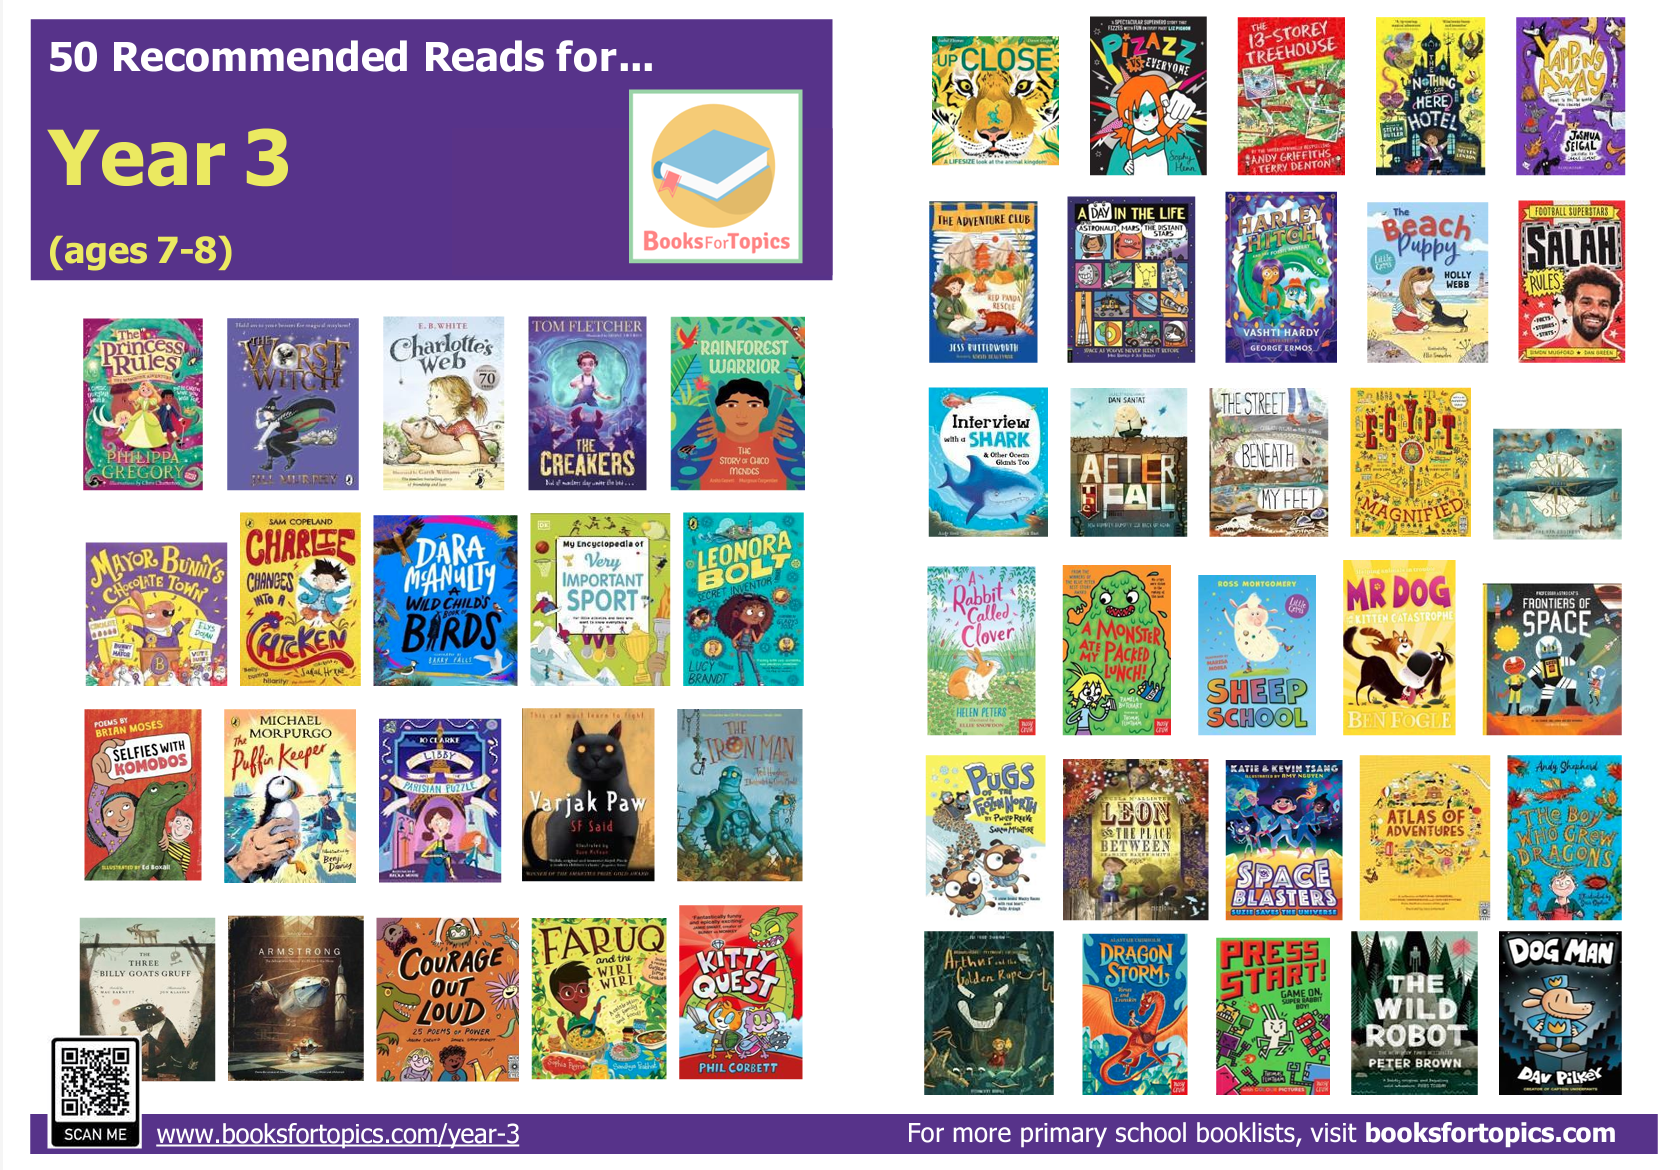 y3 recommended reading list poster